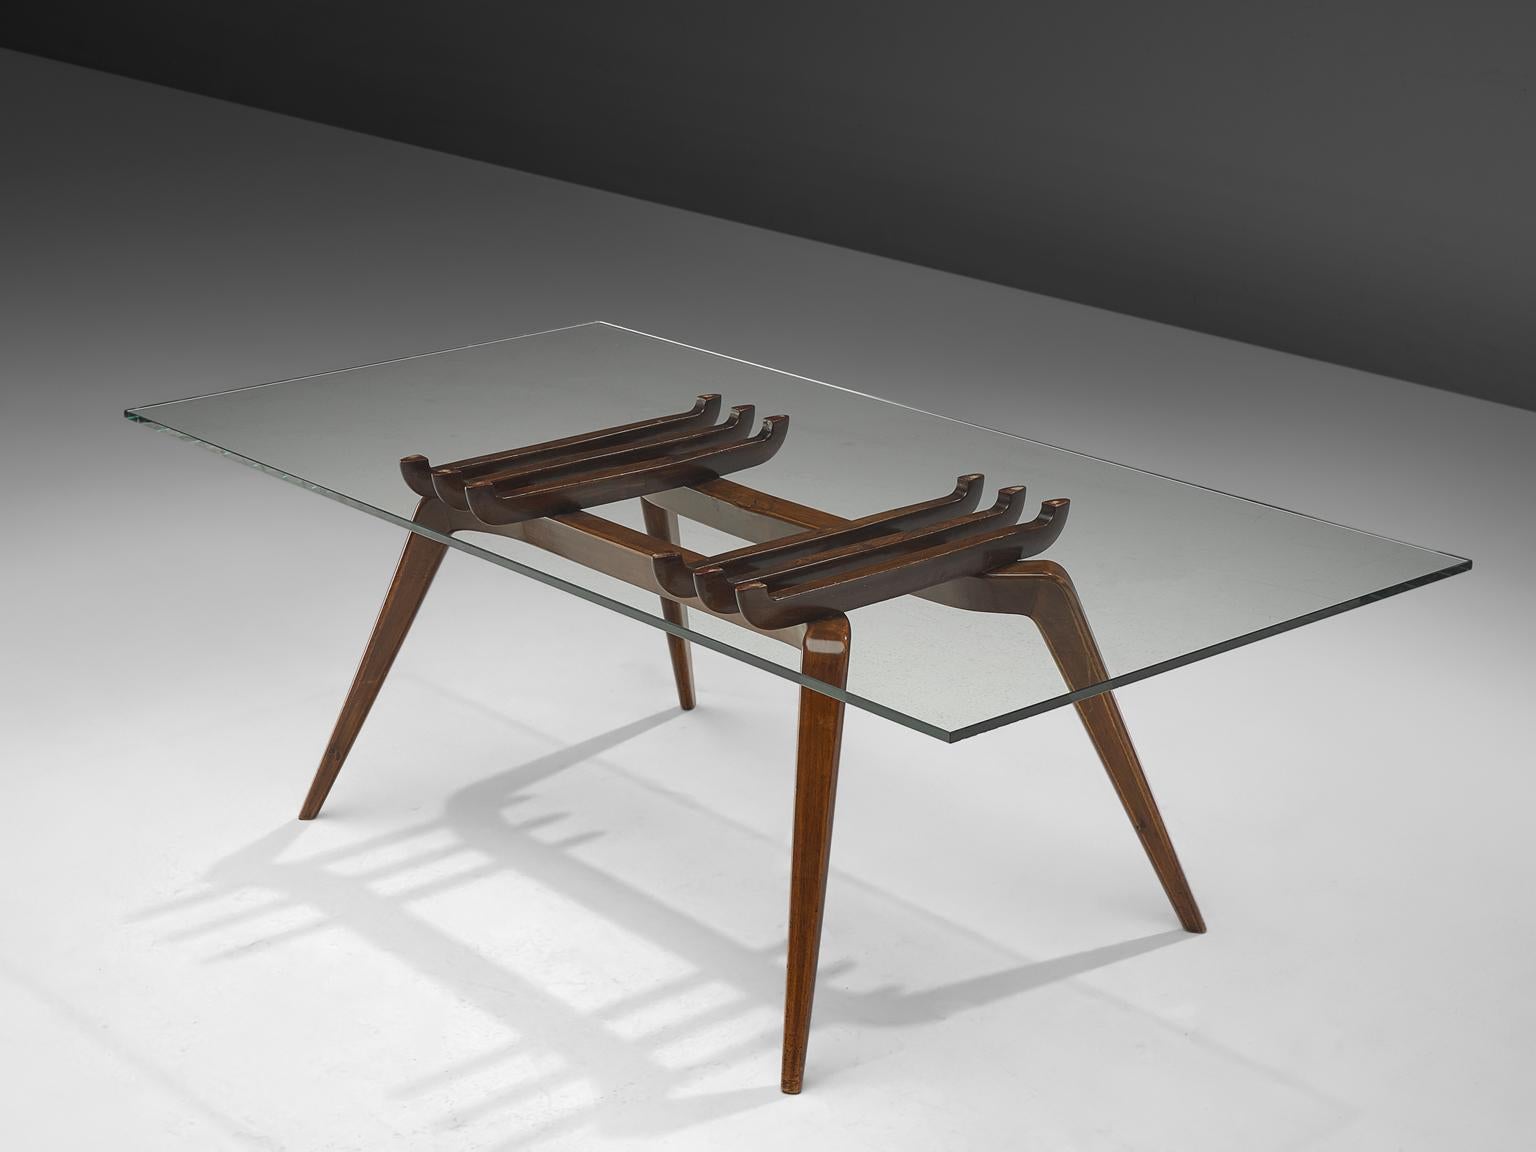 Gianni Vigorelli, dining table, glass and walnut, Italy, 1950s.

This sculptural table is designed by Italian designer Gianni Vigorelli. The table is simply called: Tavolo da pranzo (dining table). 
The beautiful, elegant frame, features tapered